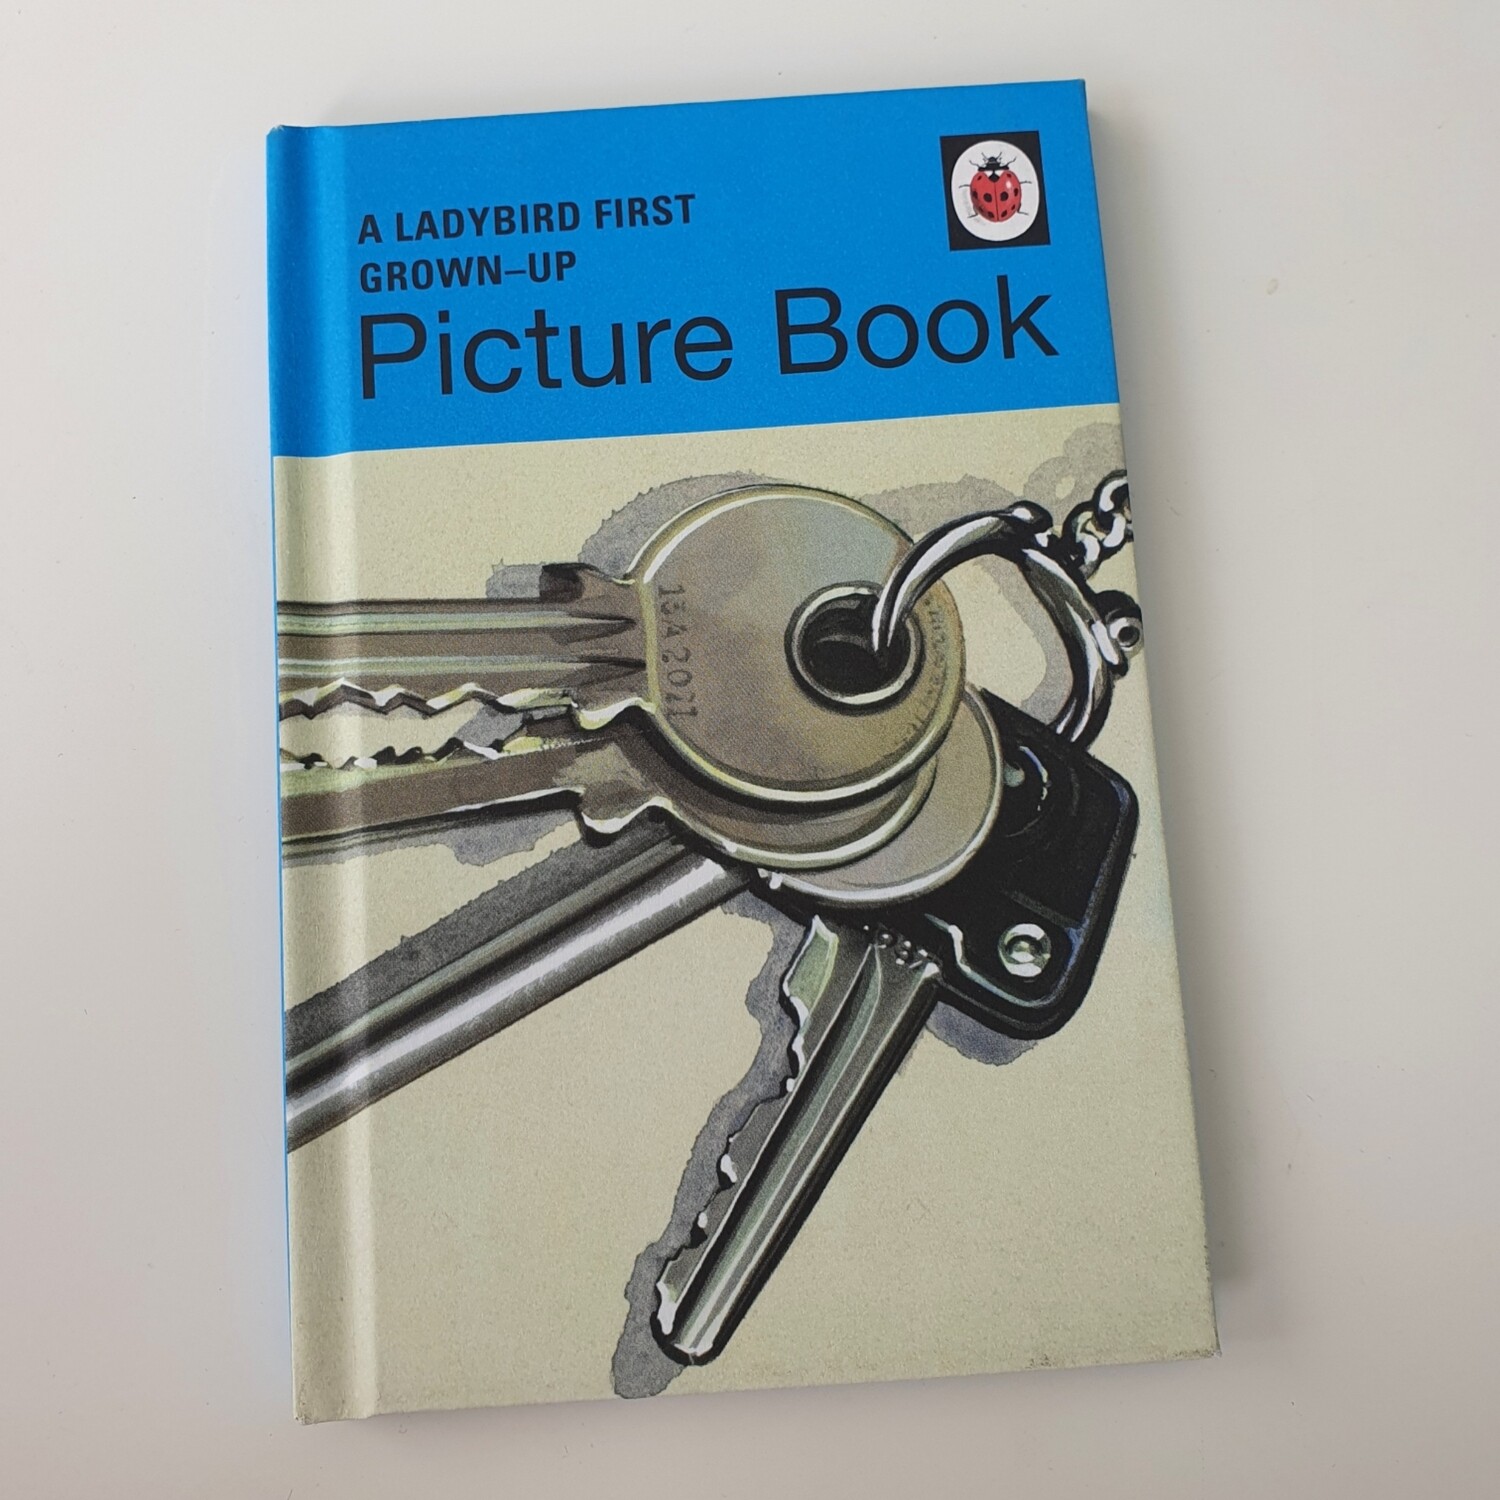 Keys Picture Book - ladybird book - new home - new car